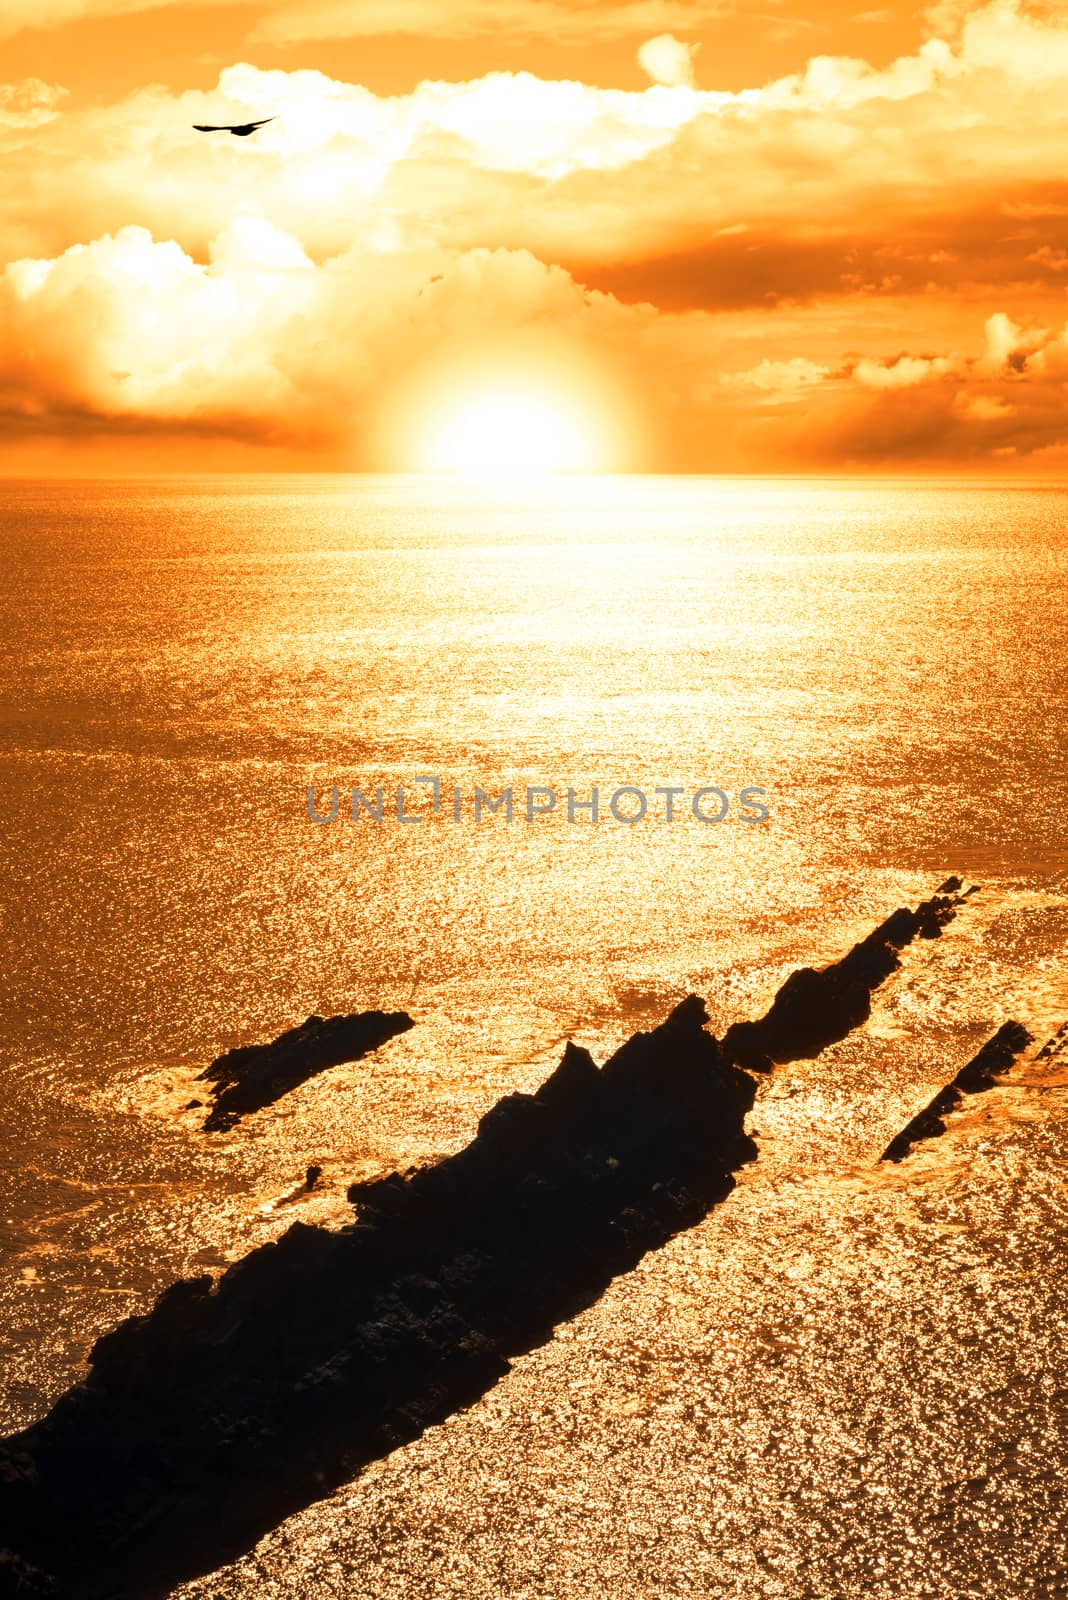 rocky jagged coastline and cliffs sunset in county kerry ireland on the wild atlantic way